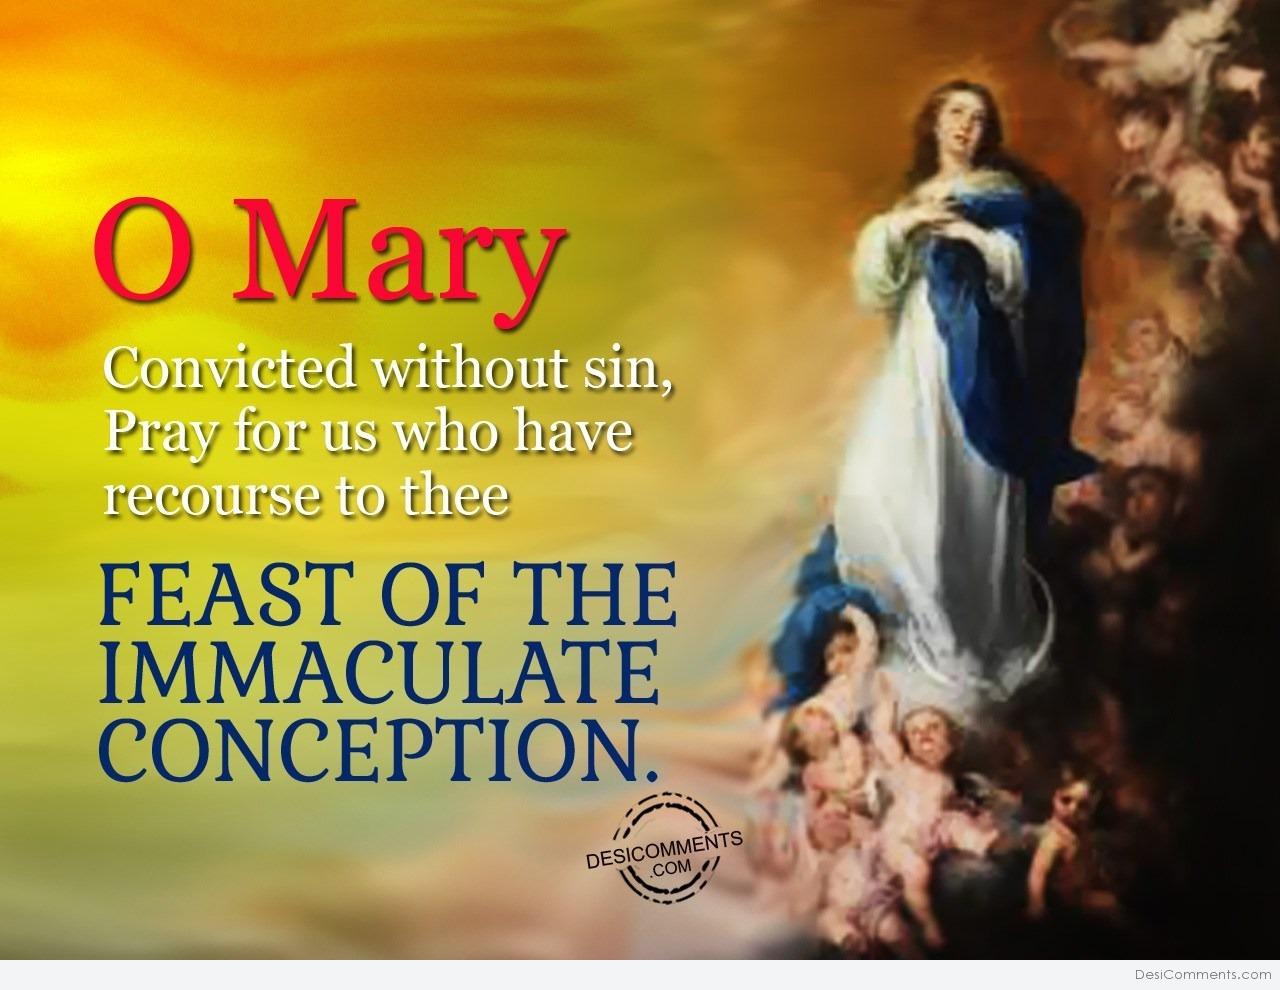 Feast Of The Immaculate Conception everynew